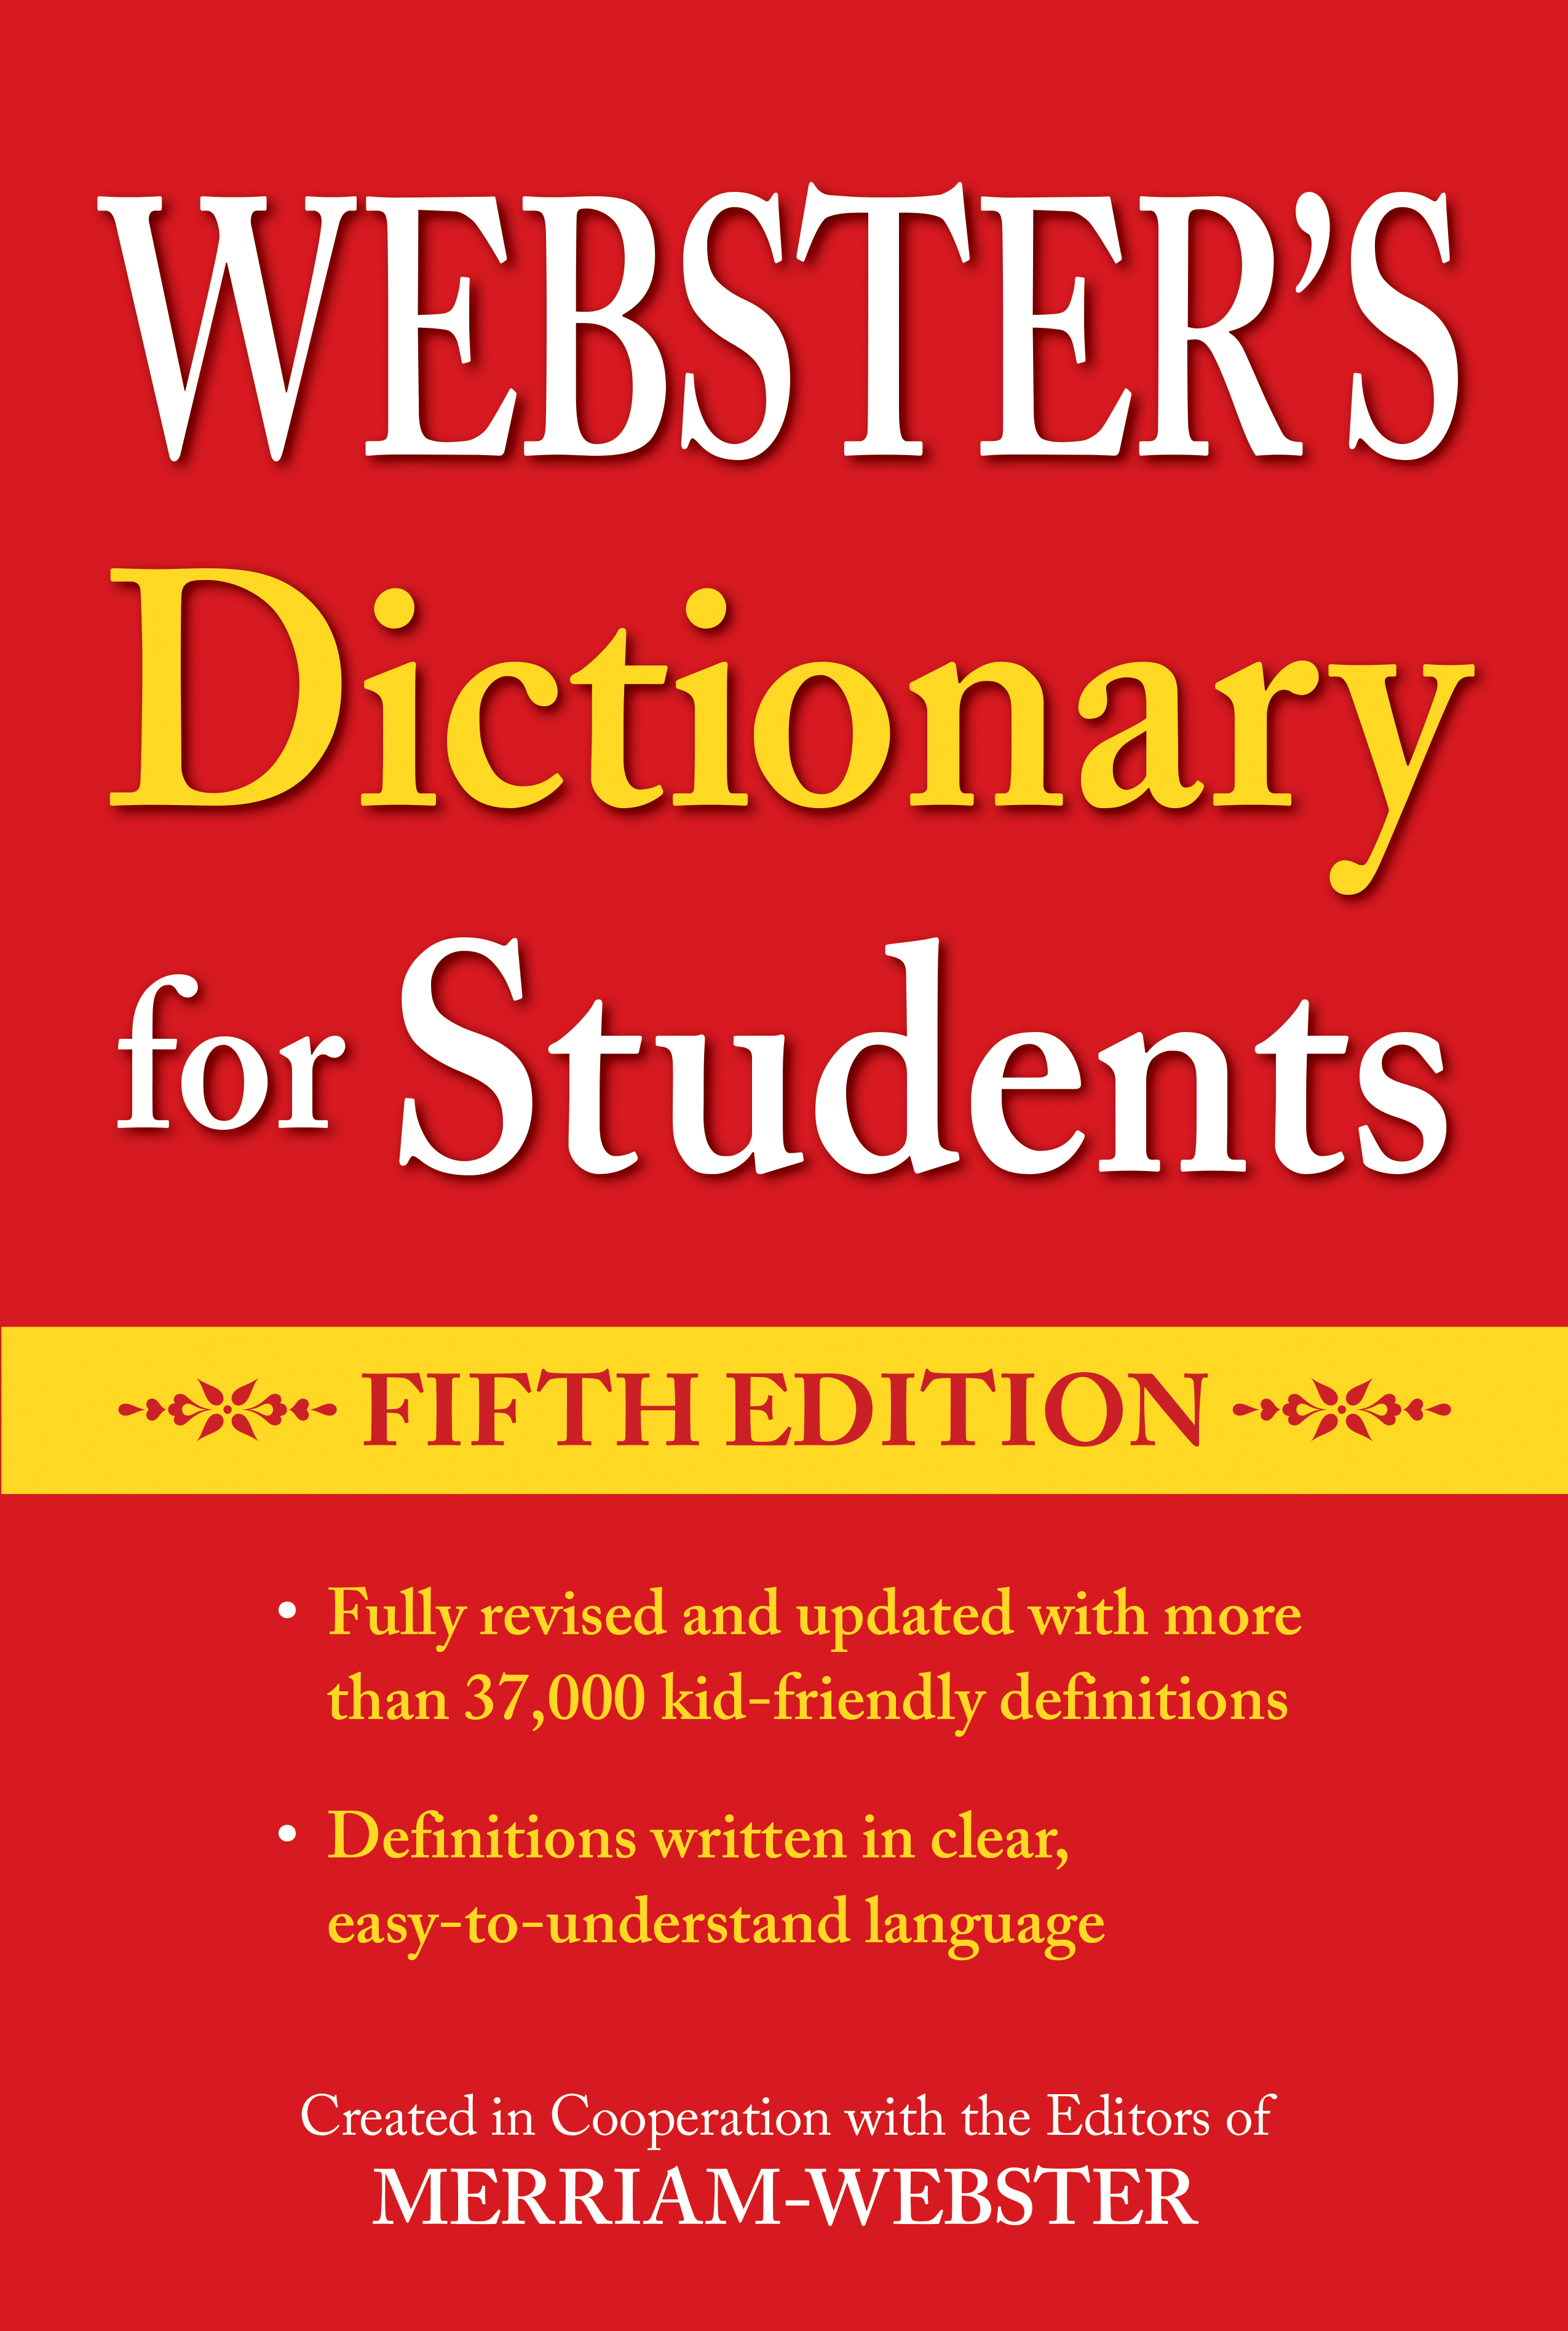 webster's dictionary for students, fifth edition | federal street press